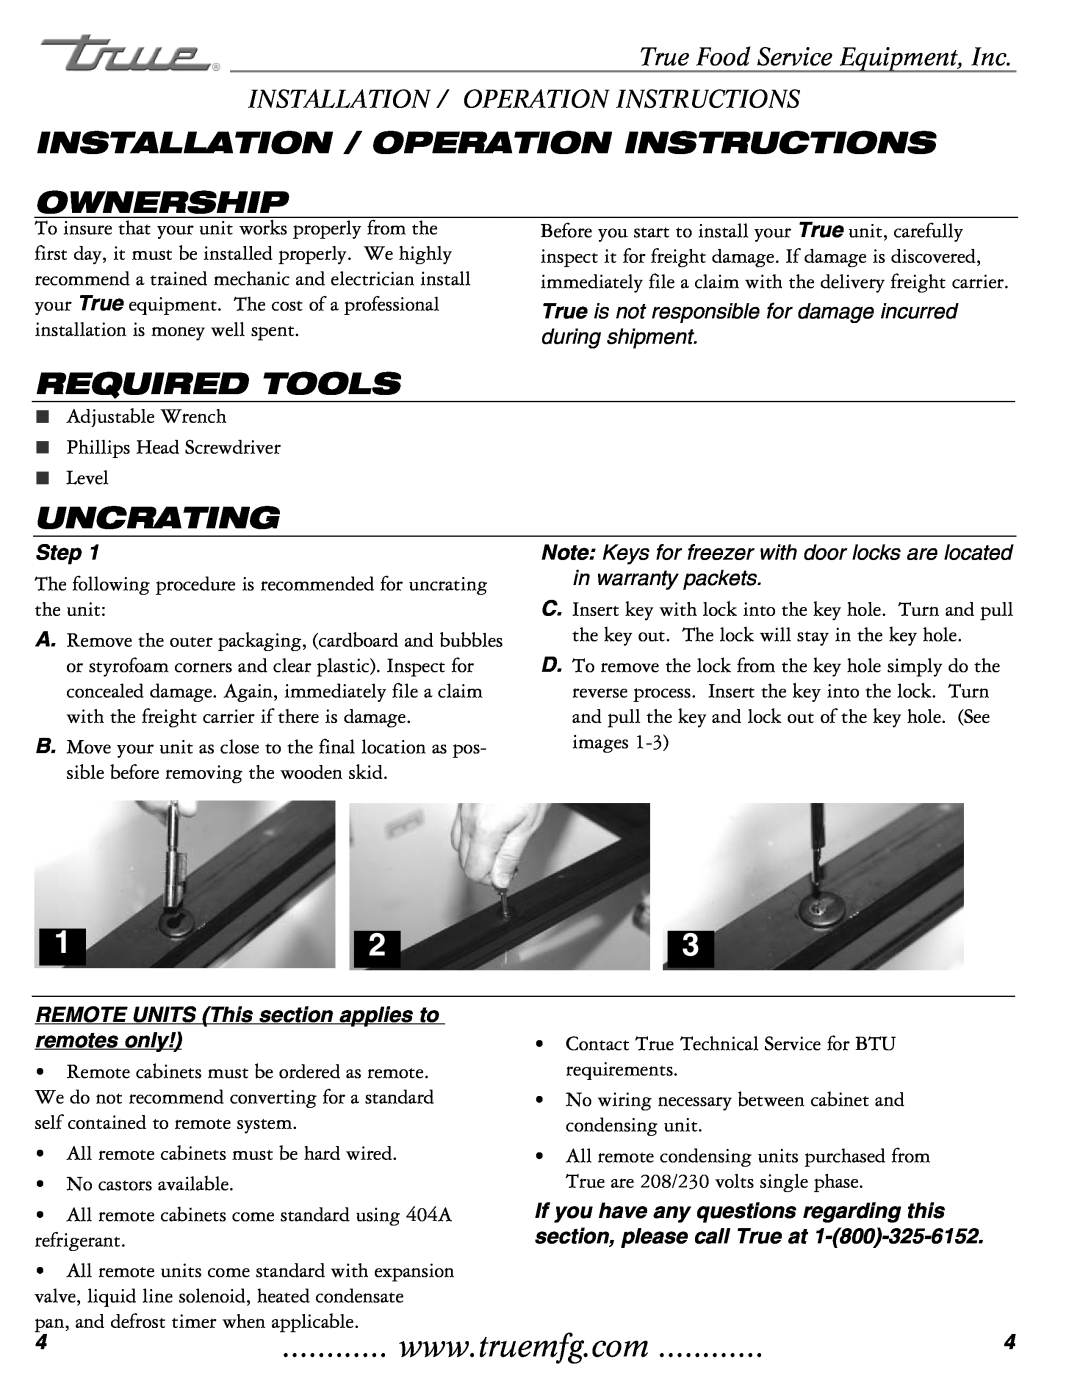 True Manufacturing Company THF-41FL Installation / Operation Instructions Ownership, Required Tools, Uncrating, Step 